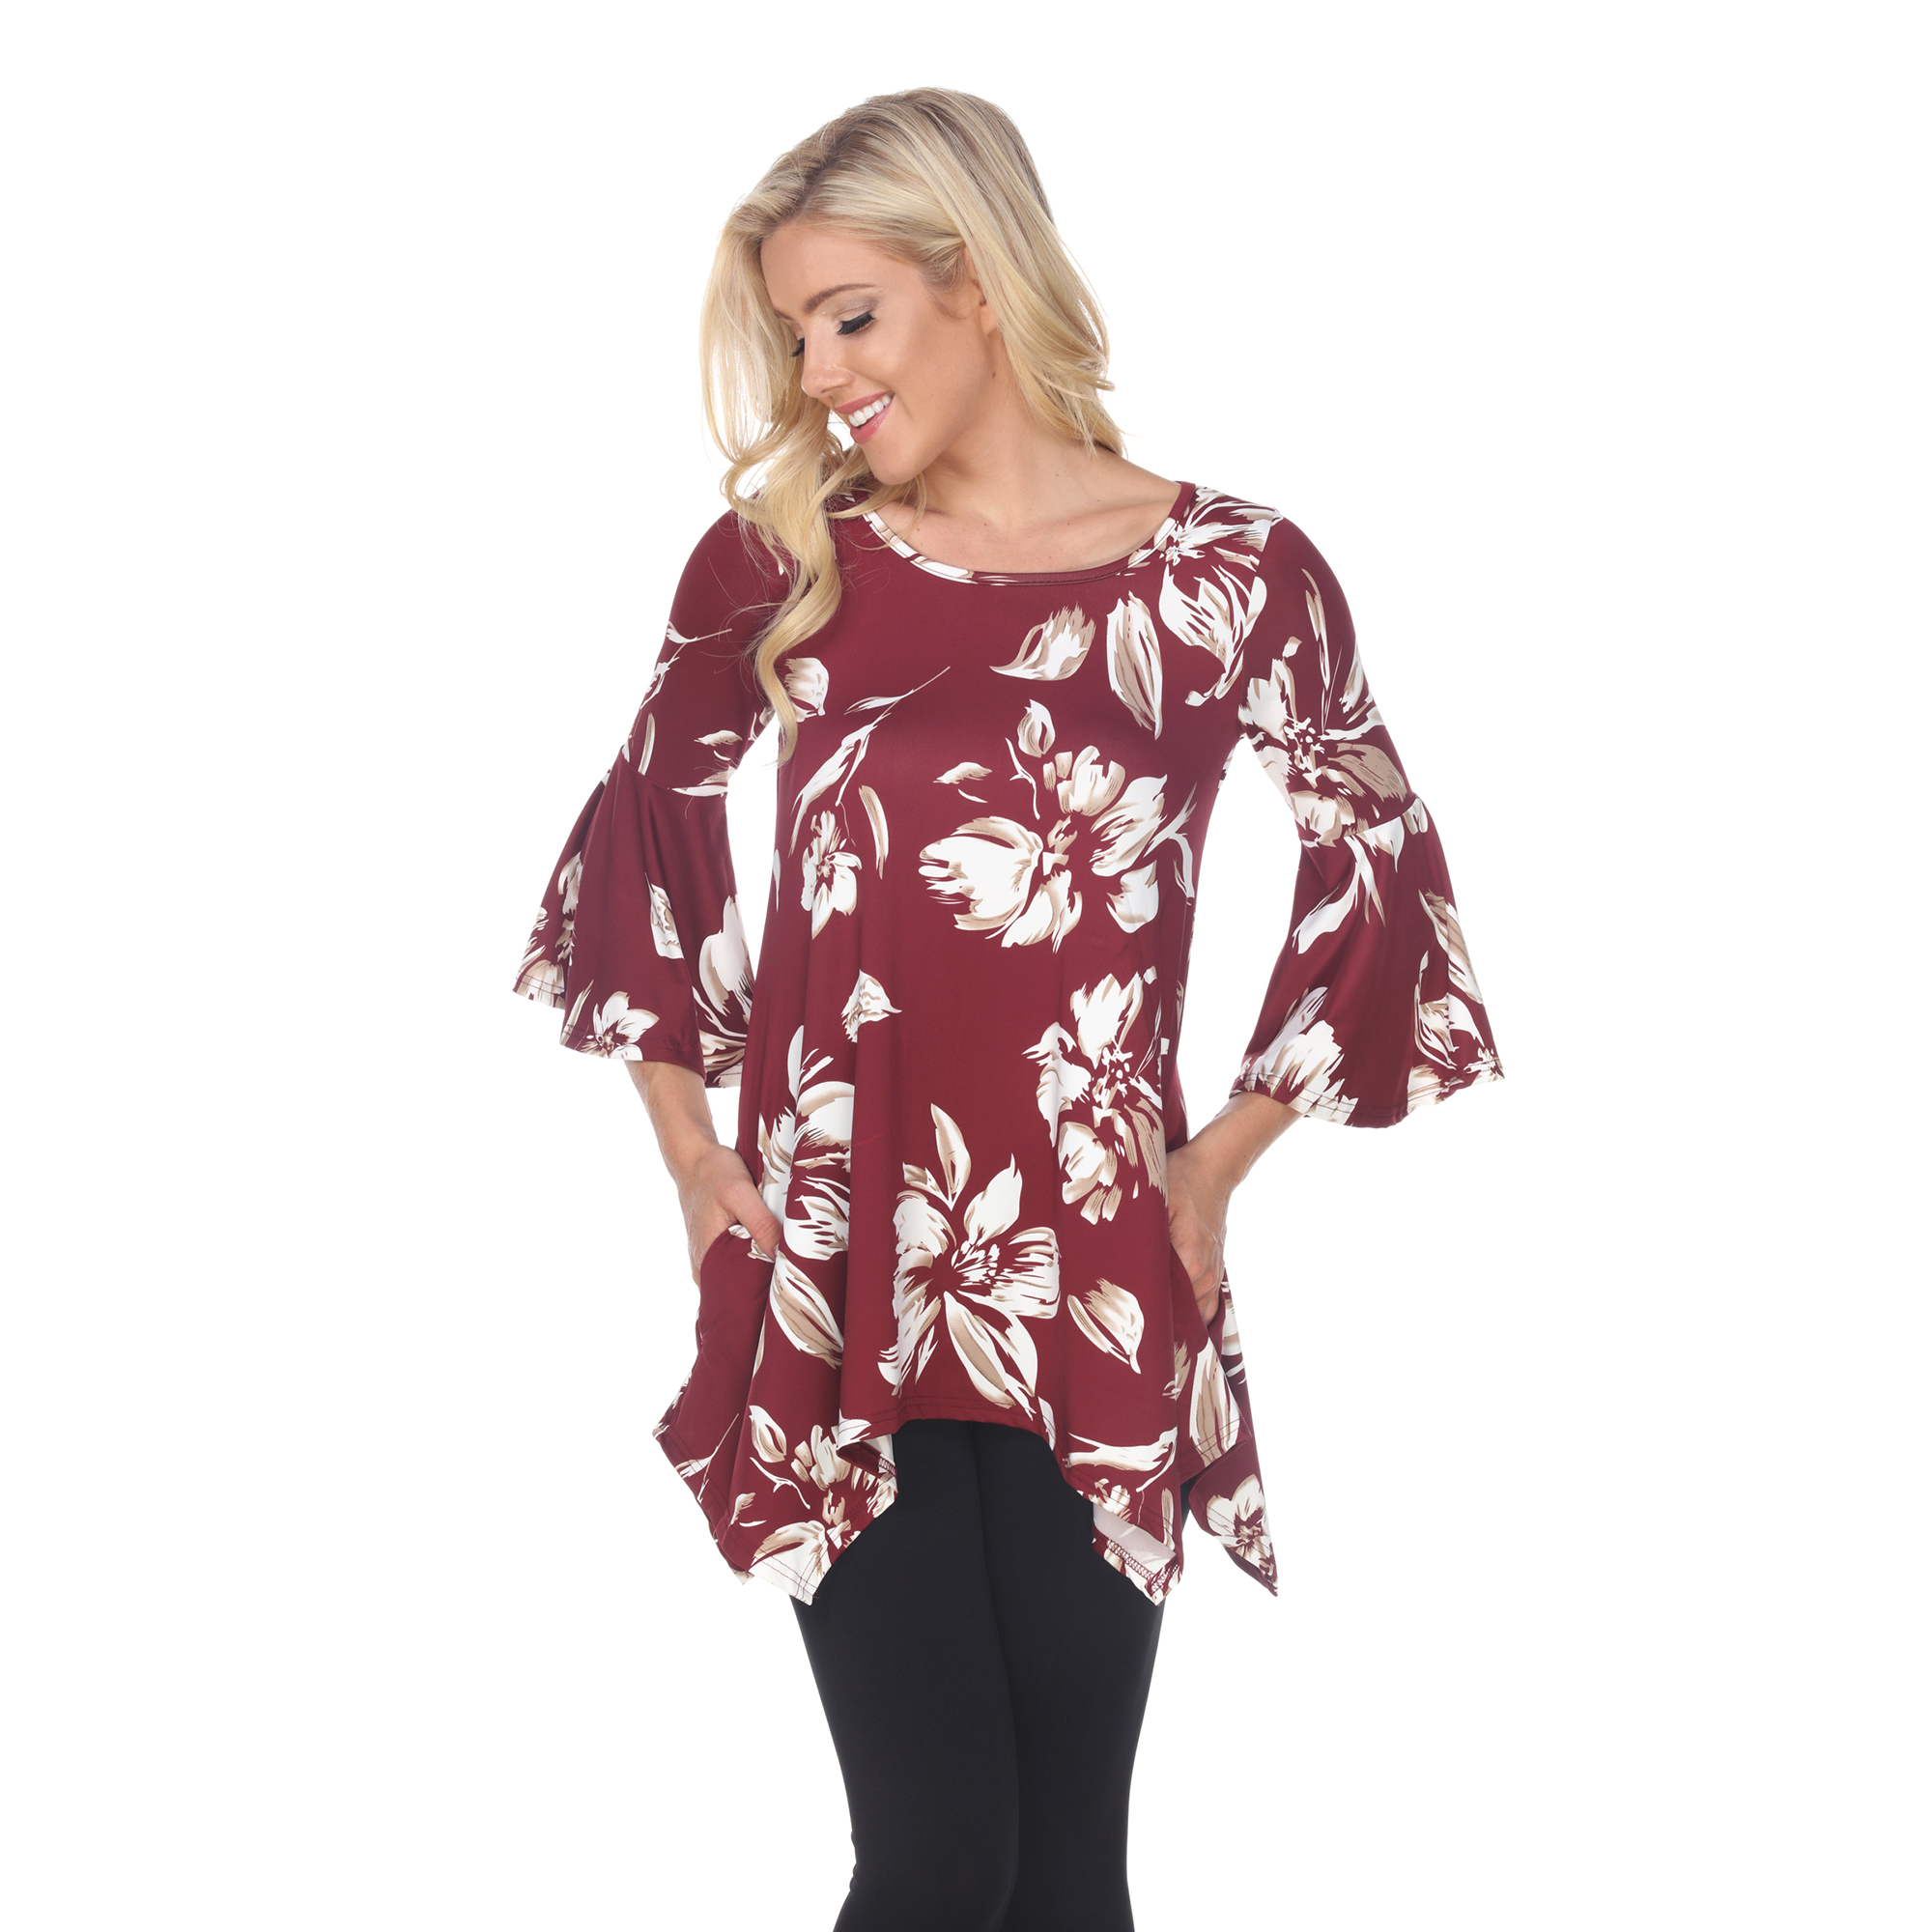 White Mark Women's Floral Print Quarter Sleeve Tunic Top With Pockets - Red, 4X